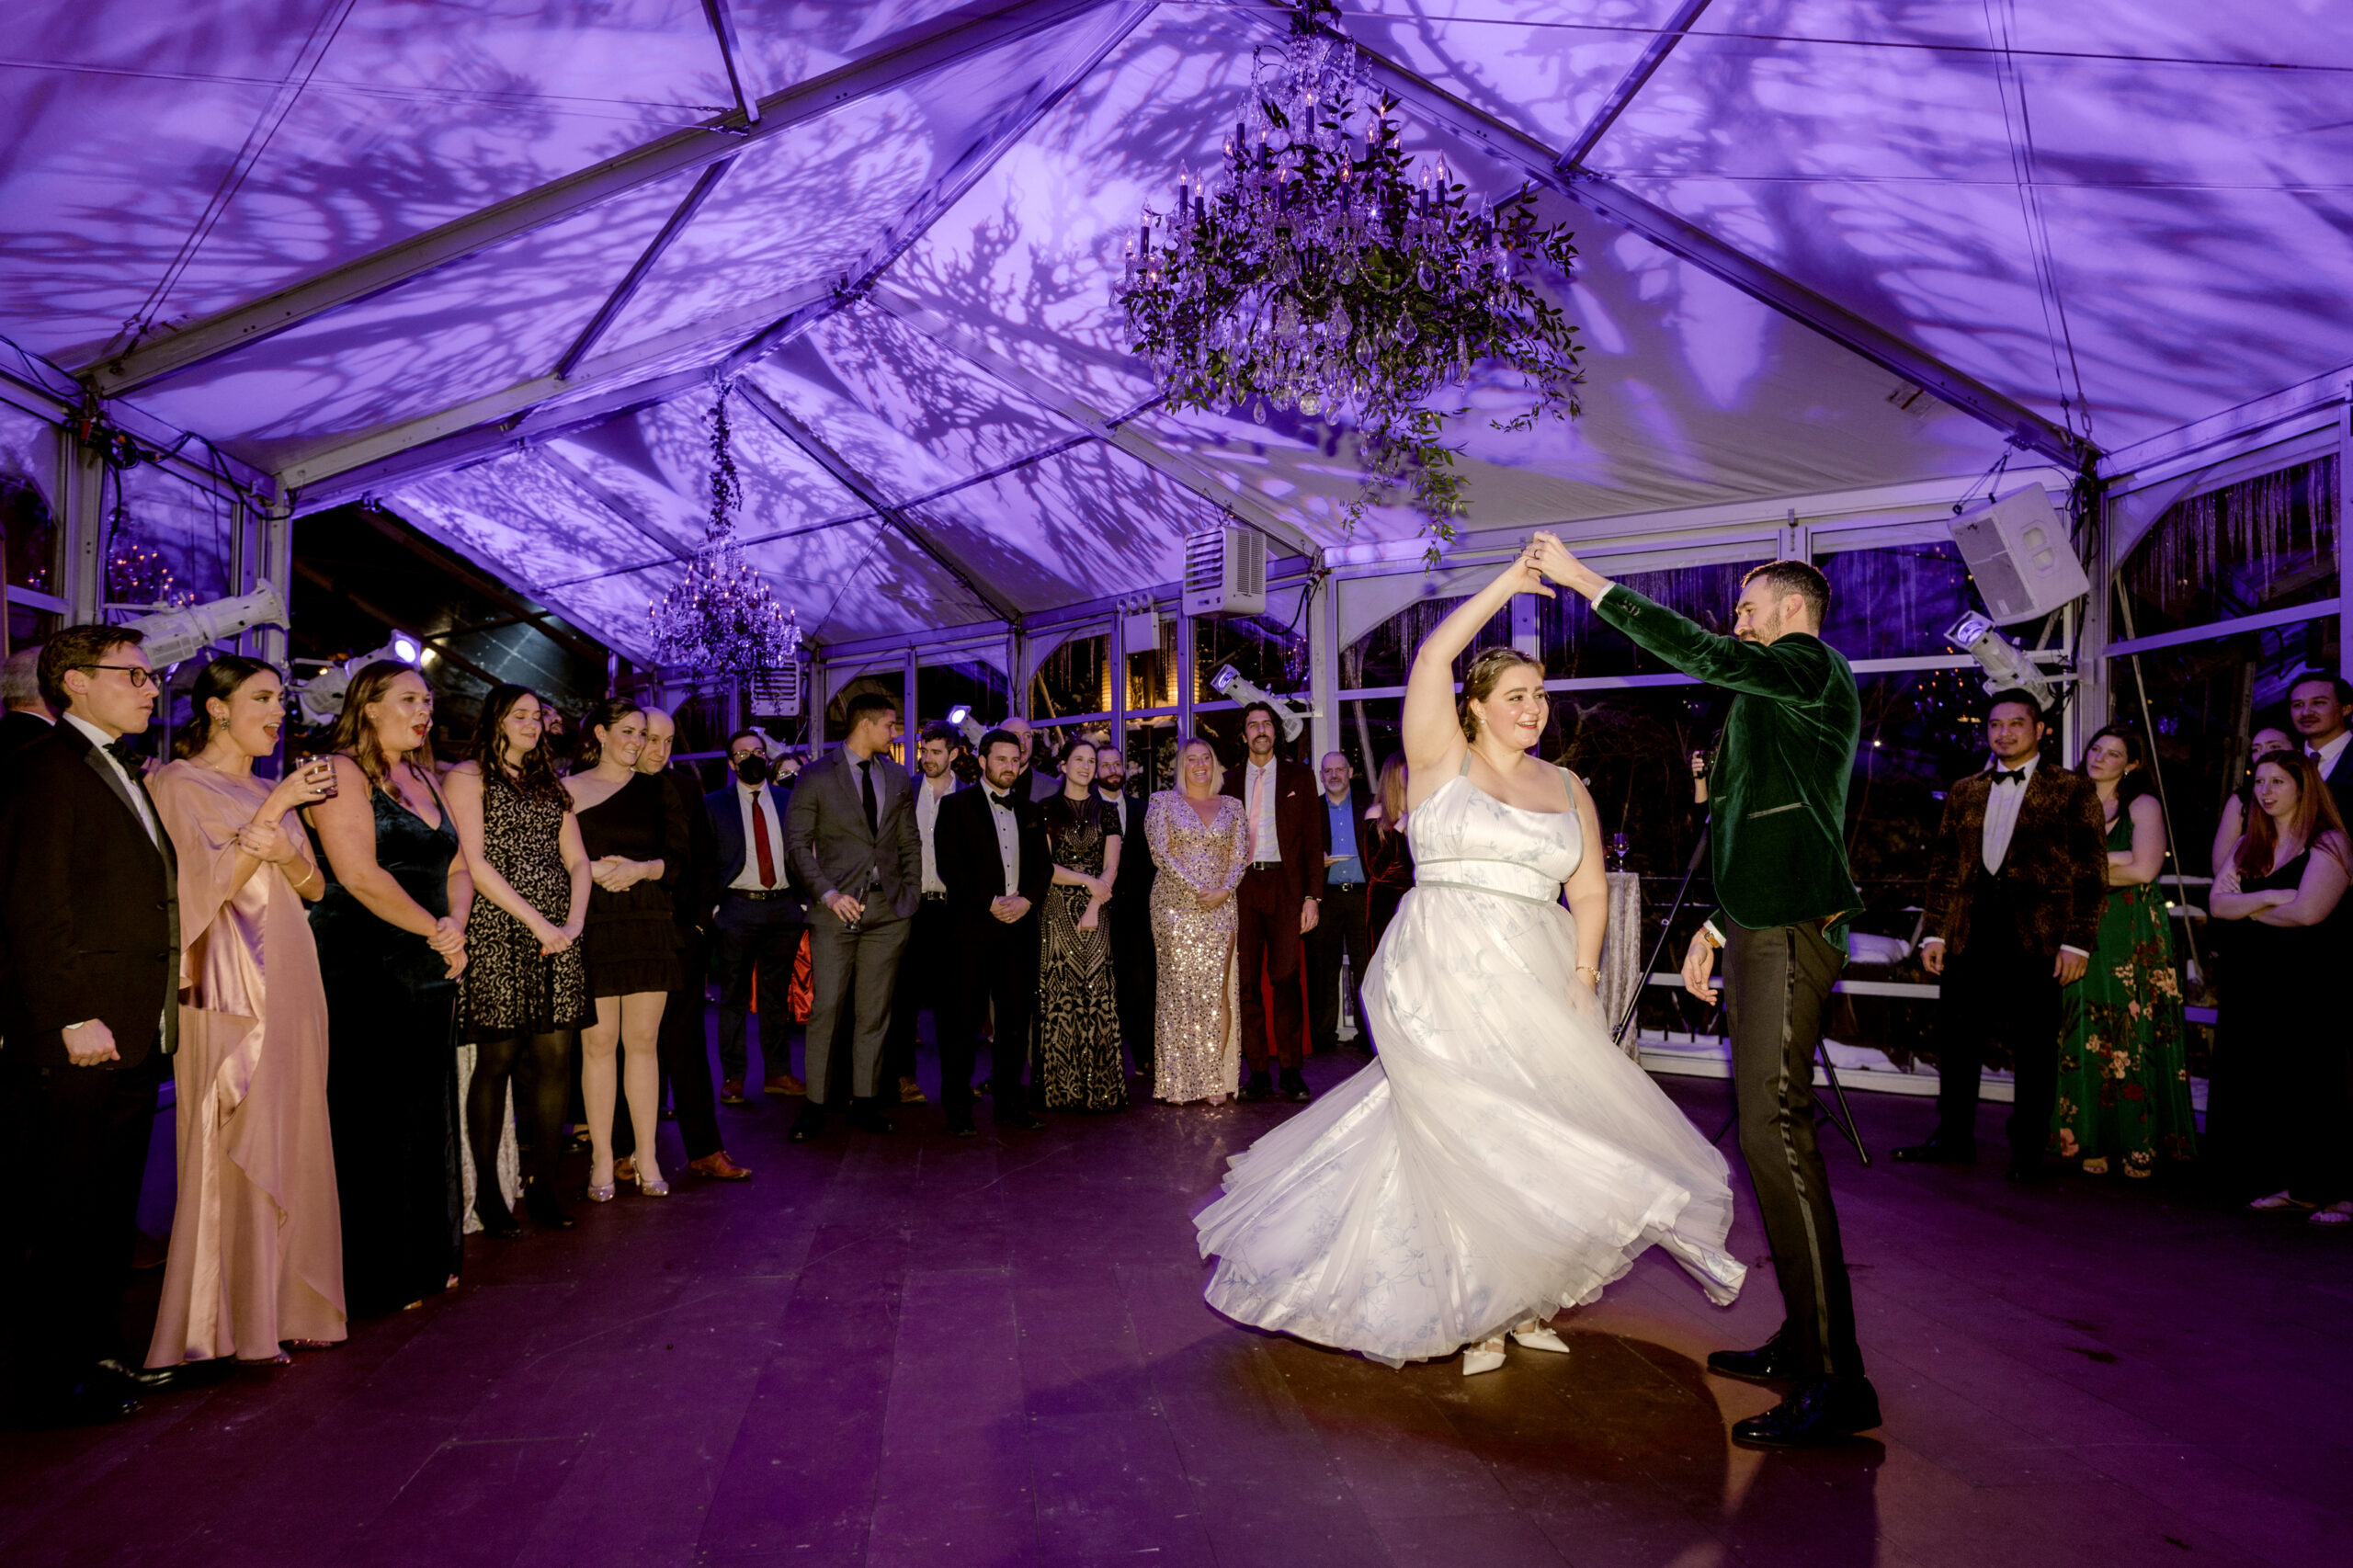 The newlyweds are happily dancing while guests are watching. Editorial image by Jenny Fu Studio